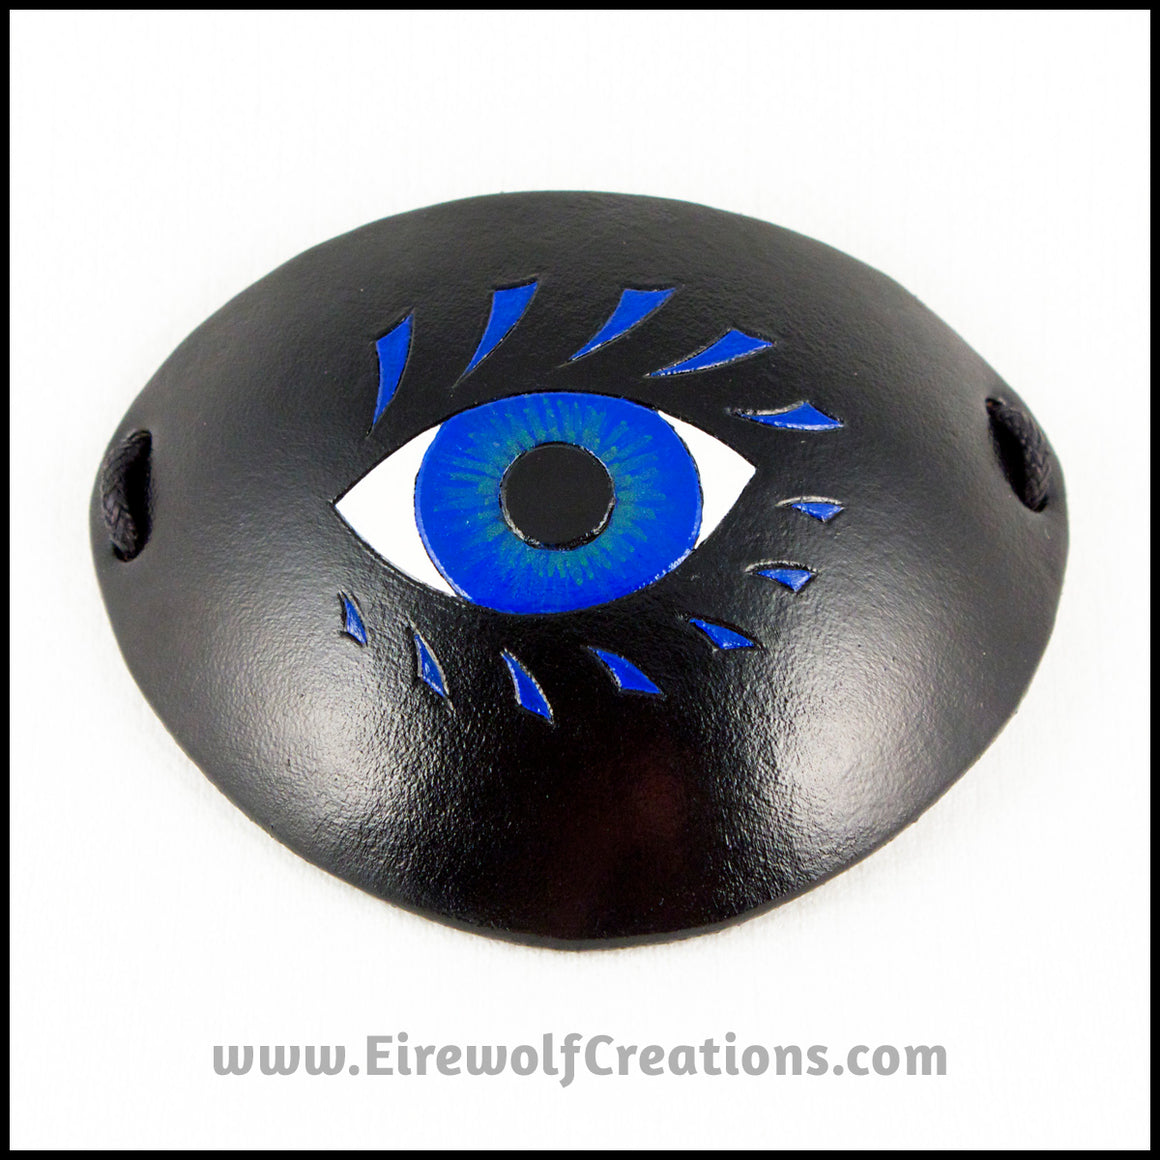 A bold graphic stylized blue eye with blue eyelashes carved and painted onto a handmade black leather eye patch, for a masquerade costume or pirate cosplay. By Erin Metcalf of Eirewolf Creations.